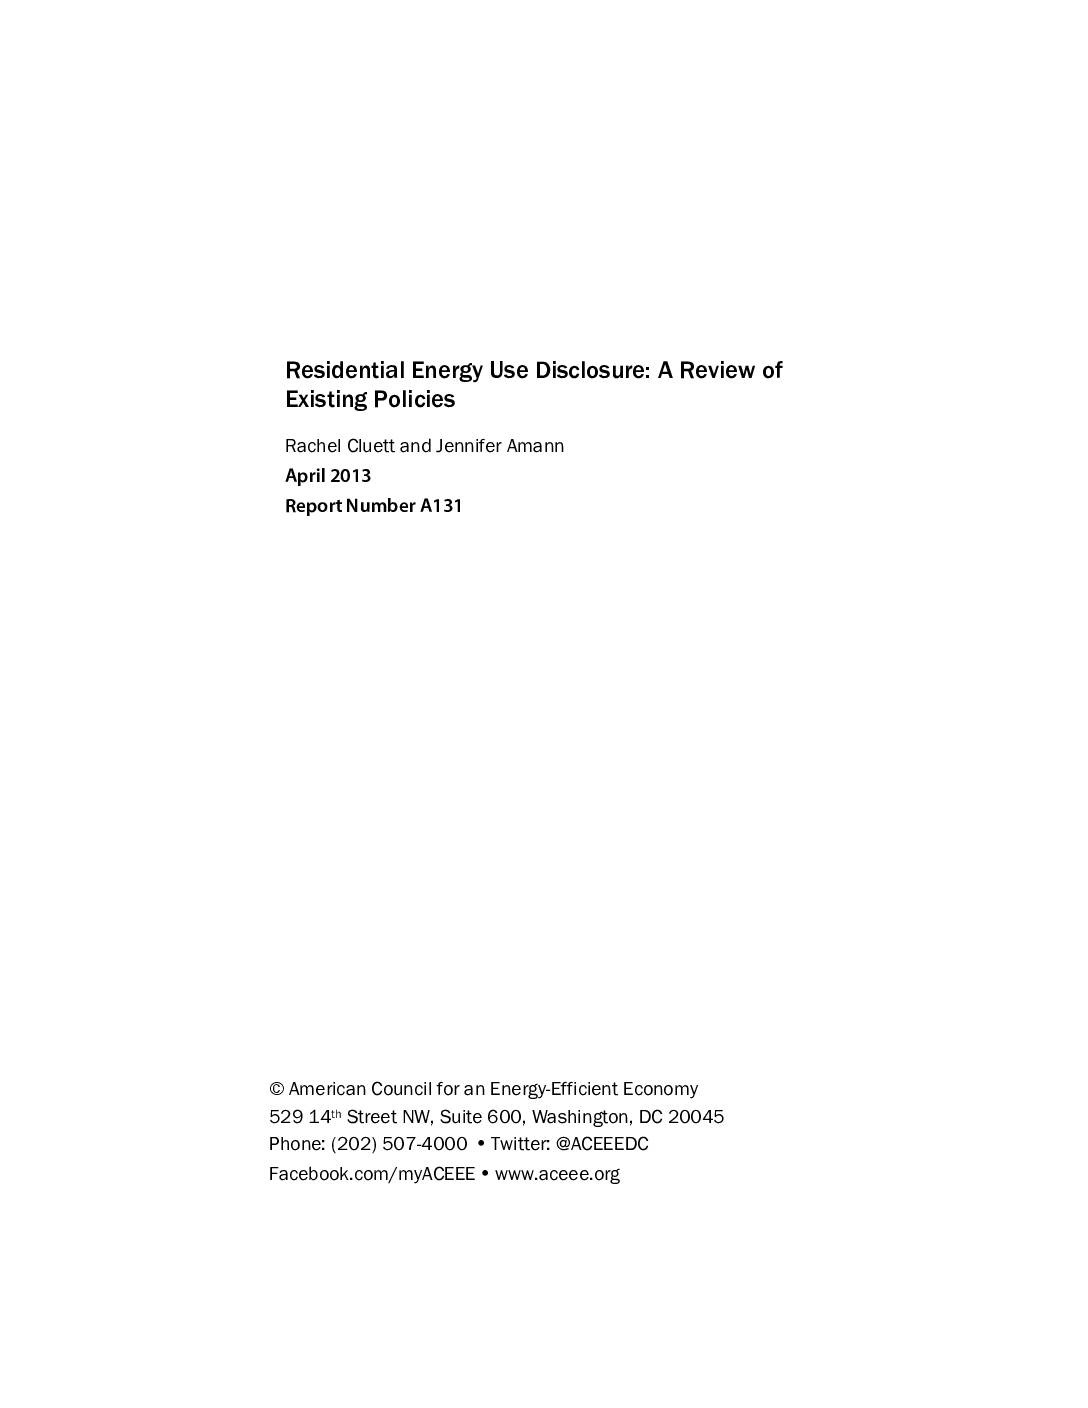 Residential Energy Use Disclosure: A Review of Existing Policies